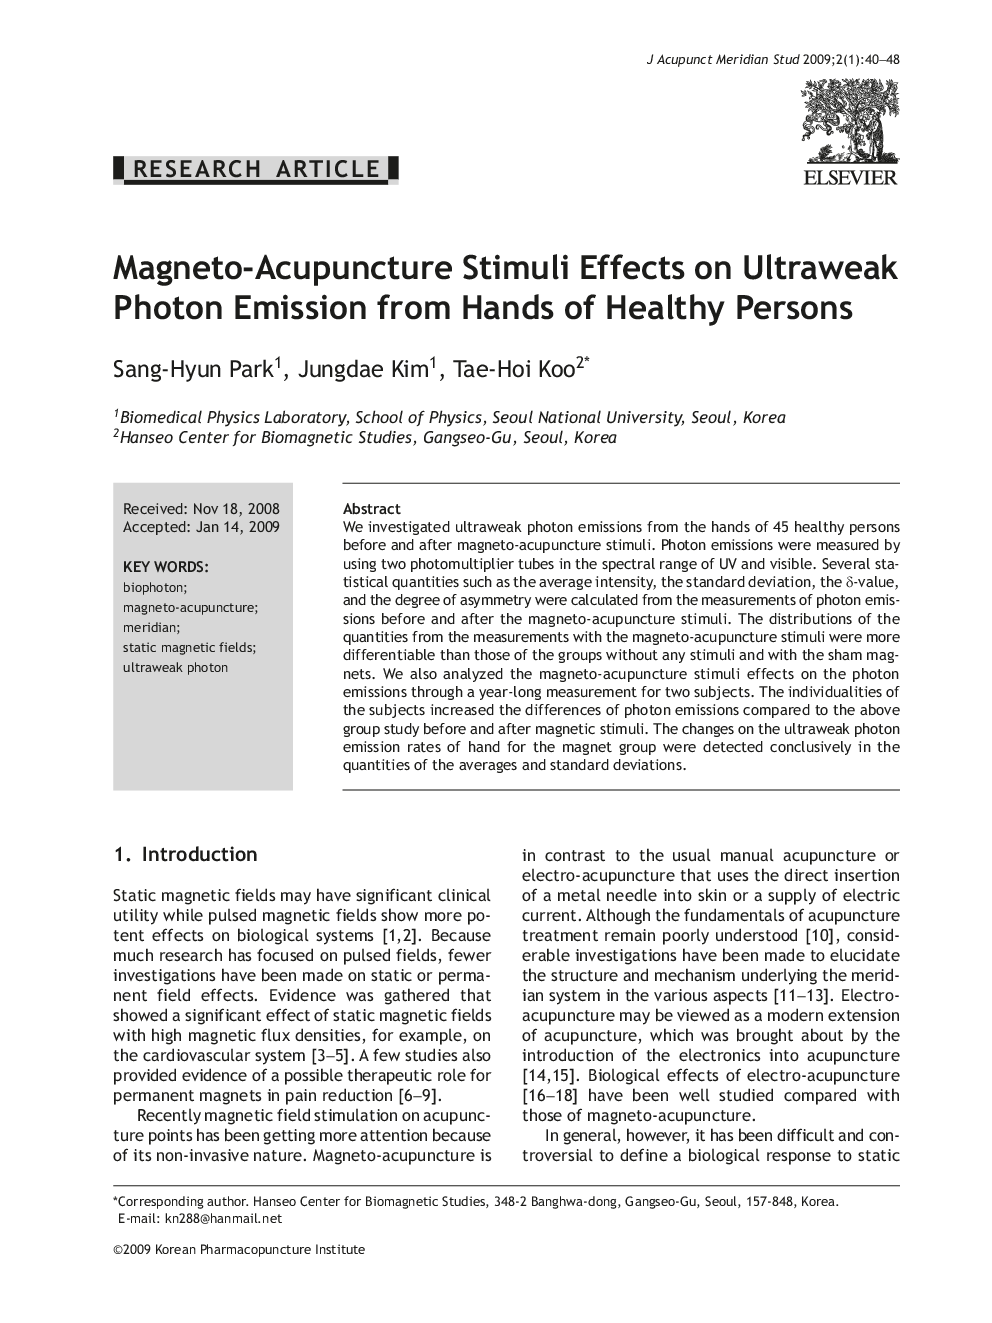 Magneto-Acupuncture Stimuli Effects on Ultraweak Photon Emission from Hands of Healthy Persons